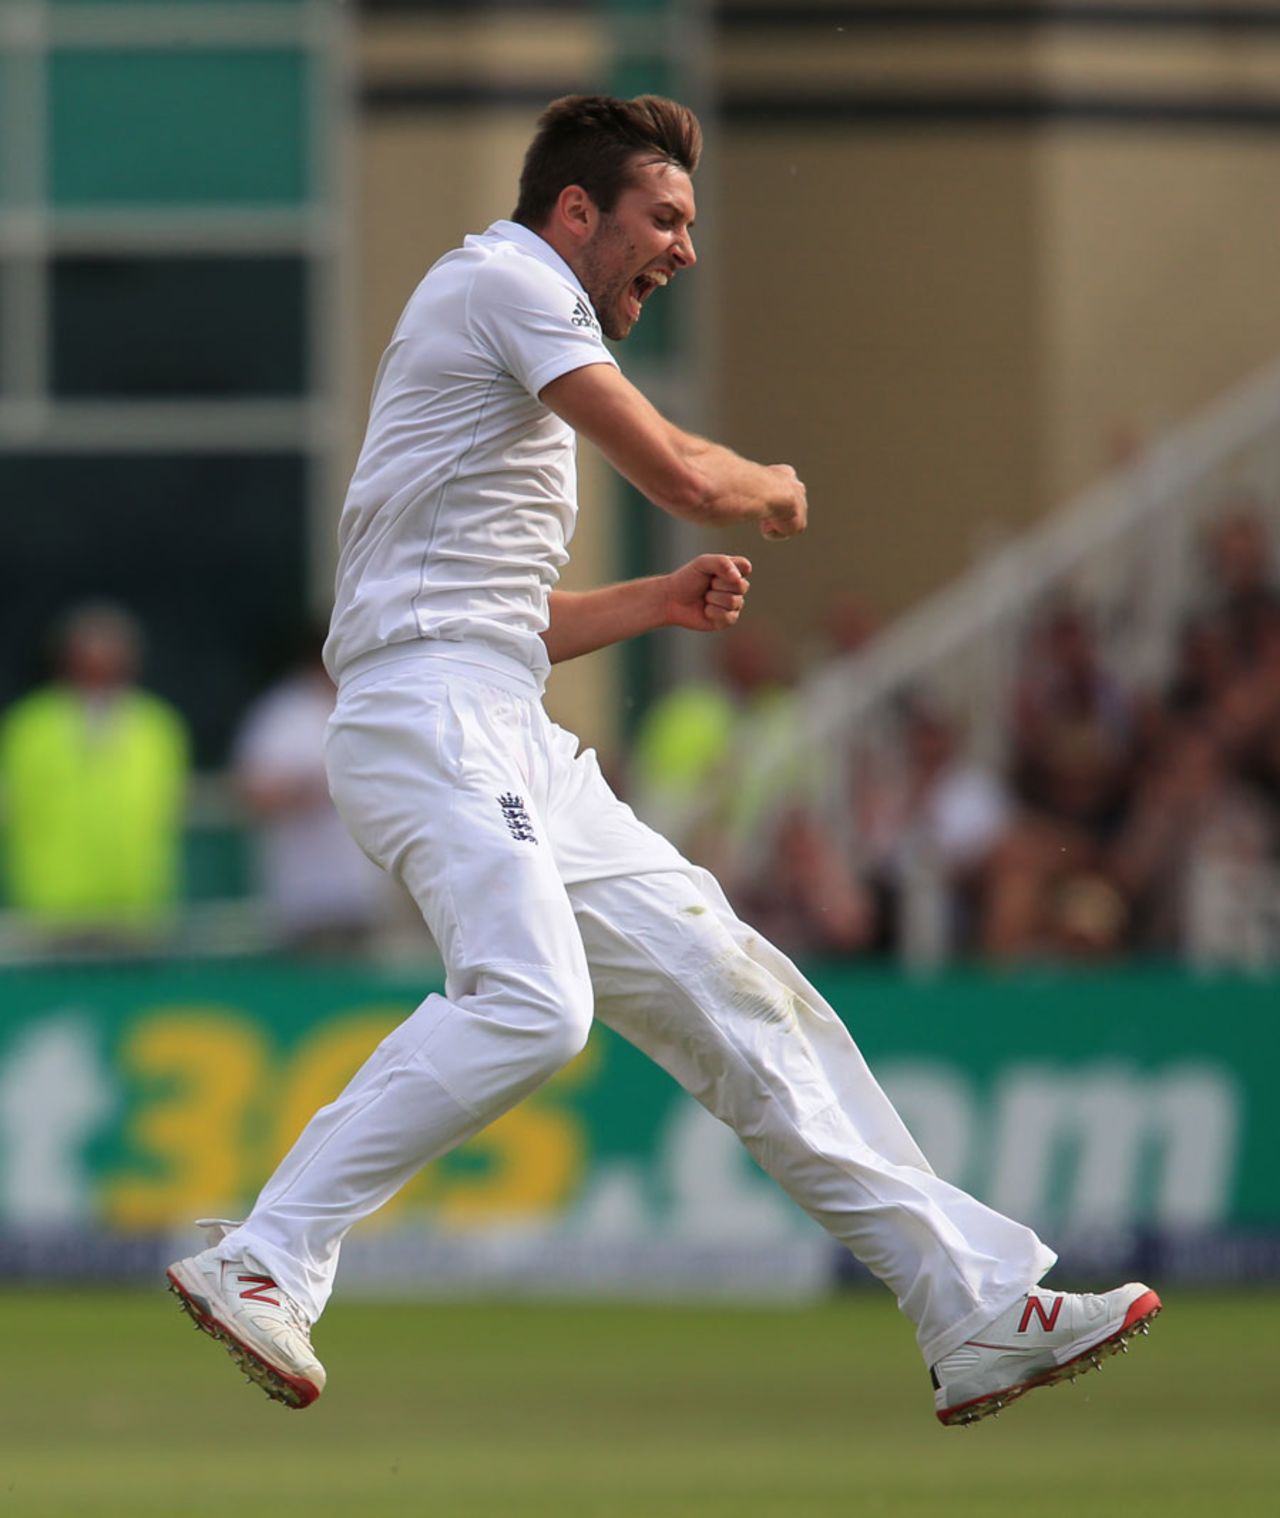 Mark Wood picked up the wicket of Michael Clarke, England v Australia, 4th Investec Test, Trent Bridge, 2nd day, August 7, 2015